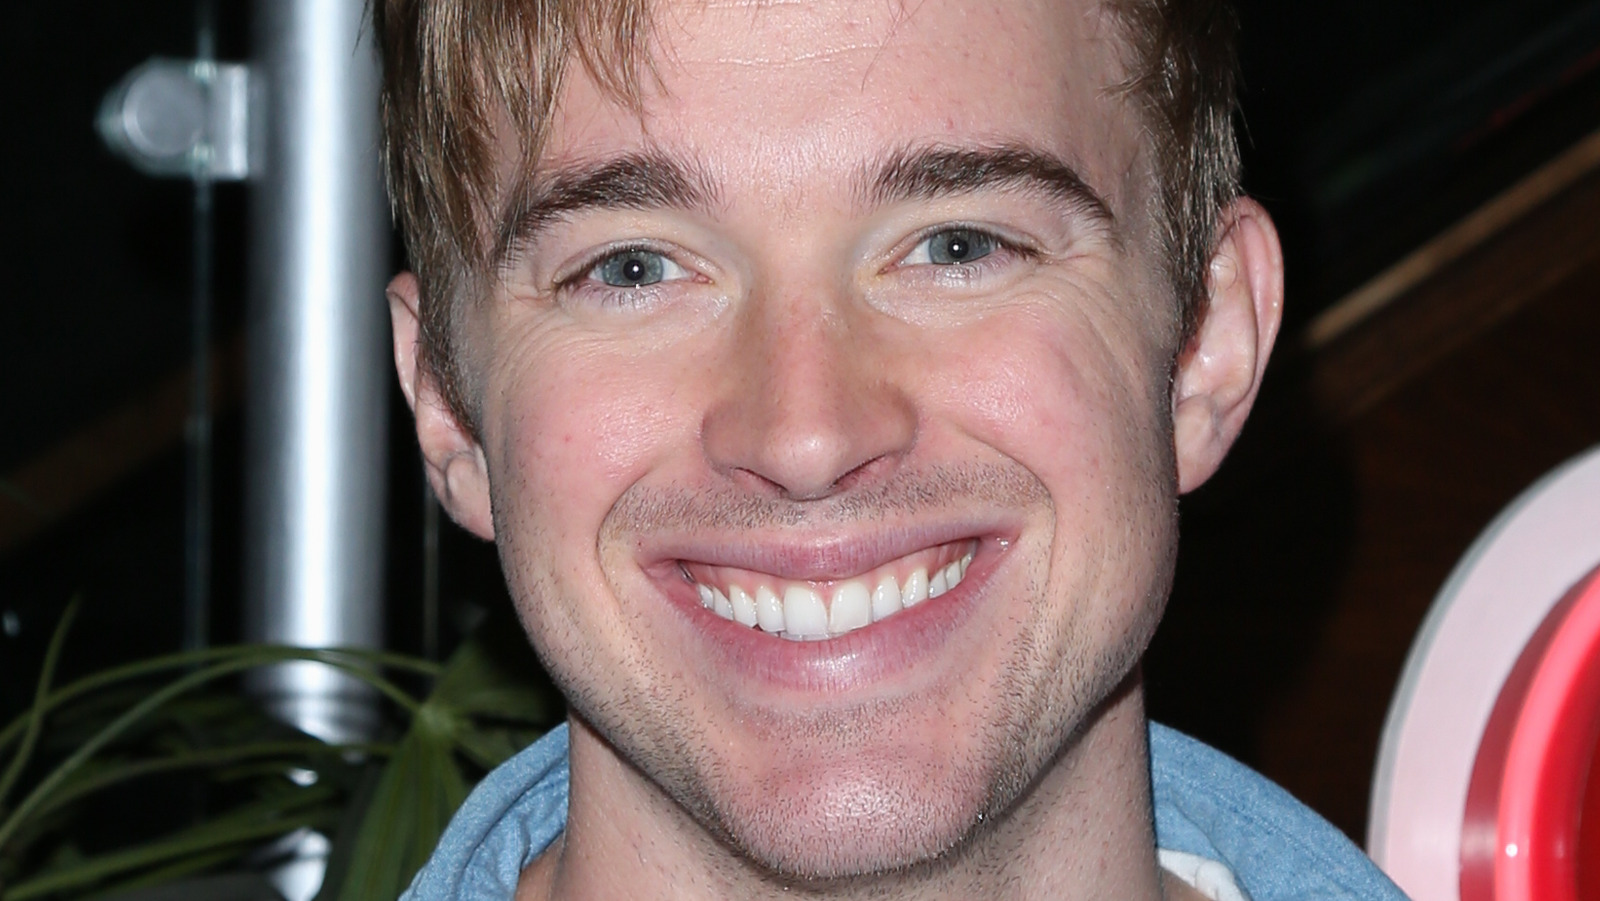 The 2022 Hallmark Holiday Movie Starring Days Of Our Lives' Chandler Massey